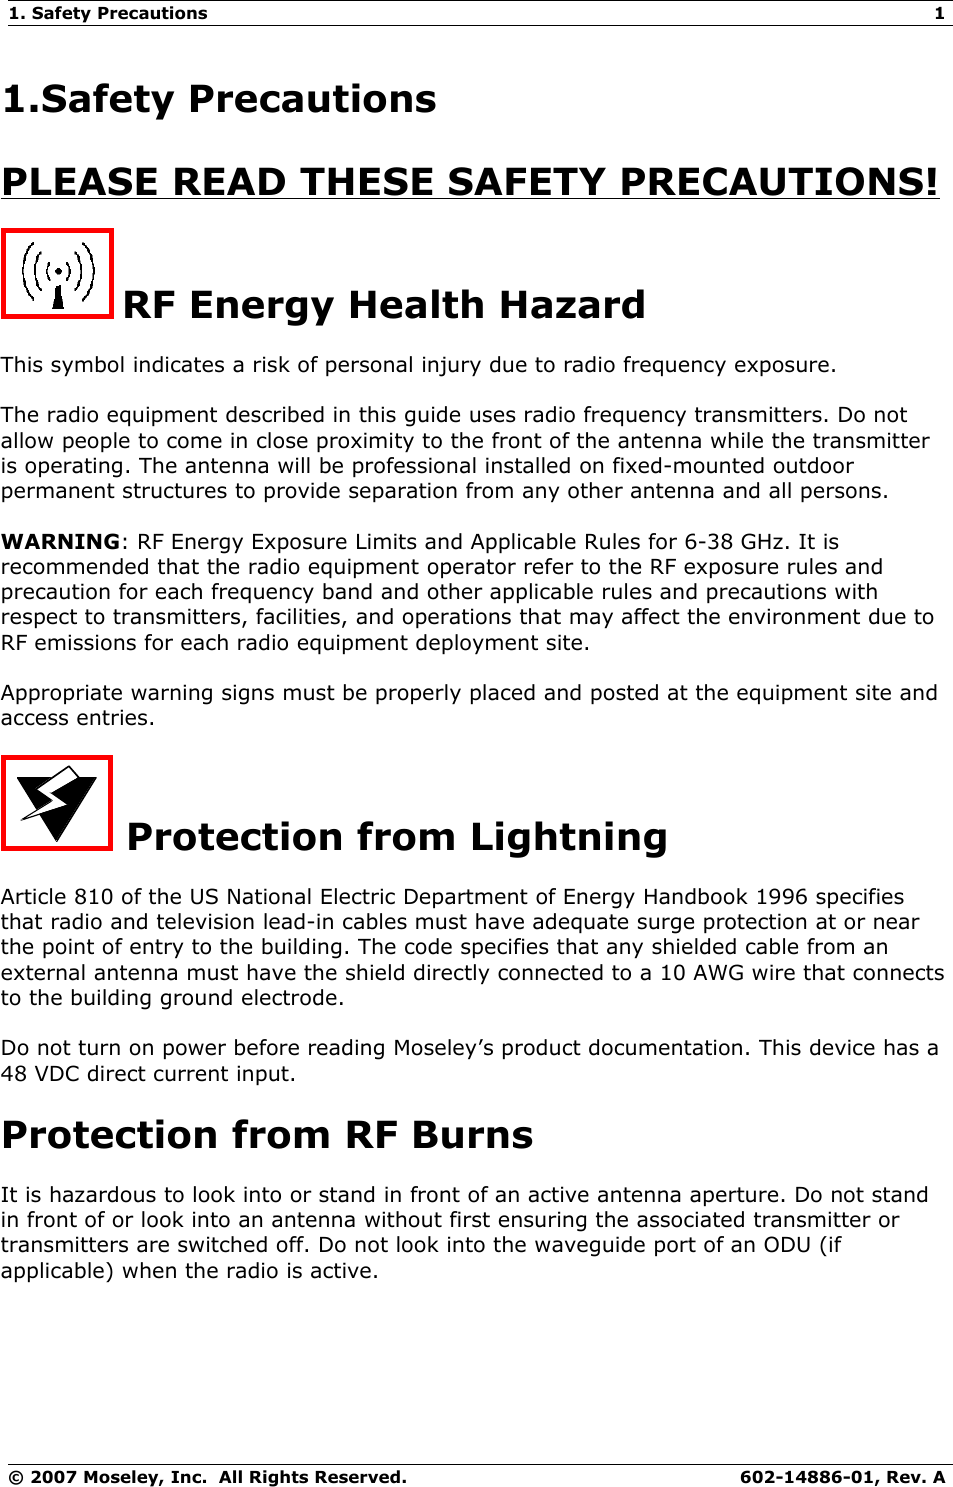 1. Safety Precautions 11.Safety PrecautionsPLEASE READ THESE SAFETY PRECAUTIONS! RF Energy Health HazardThis symbol indicates a risk of personal injury due to radio frequency exposure.The radio equipment described in this guide uses radio frequency transmitters. Do not allow people to come in close proximity to the front of the antenna while the transmitter is operating. The antenna will be professional installed on fixed-mounted outdoor permanent structures to provide separation from any other antenna and all persons.WARNING: RF Energy Exposure Limits and Applicable Rules for 6-38 GHz. It is recommended that the radio equipment operator refer to the RF exposure rules and precaution for each frequency band and other applicable rules and precautions with respect to transmitters, facilities, and operations that may affect the environment due to RF emissions for each radio equipment deployment site. Appropriate warning signs must be properly placed and posted at the equipment site and access entries.  Protection from LightningArticle 810 of the US National Electric Department of Energy Handbook 1996 specifies that radio and television lead-in cables must have adequate surge protection at or near the point of entry to the building. The code specifies that any shielded cable from an external antenna must have the shield directly connected to a 10 AWG wire that connects to the building ground electrode.Do not turn on power before reading Moseley’s product documentation. This device has a 48 VDC direct current input.Protection from RF BurnsIt is hazardous to look into or stand in front of an active antenna aperture. Do not stand in front of or look into an antenna without first ensuring the associated transmitter or transmitters are switched off. Do not look into the waveguide port of an ODU (if applicable) when the radio is active.© 2007 Moseley, Inc.  All Rights Reserved. 602-14886-01, Rev. A